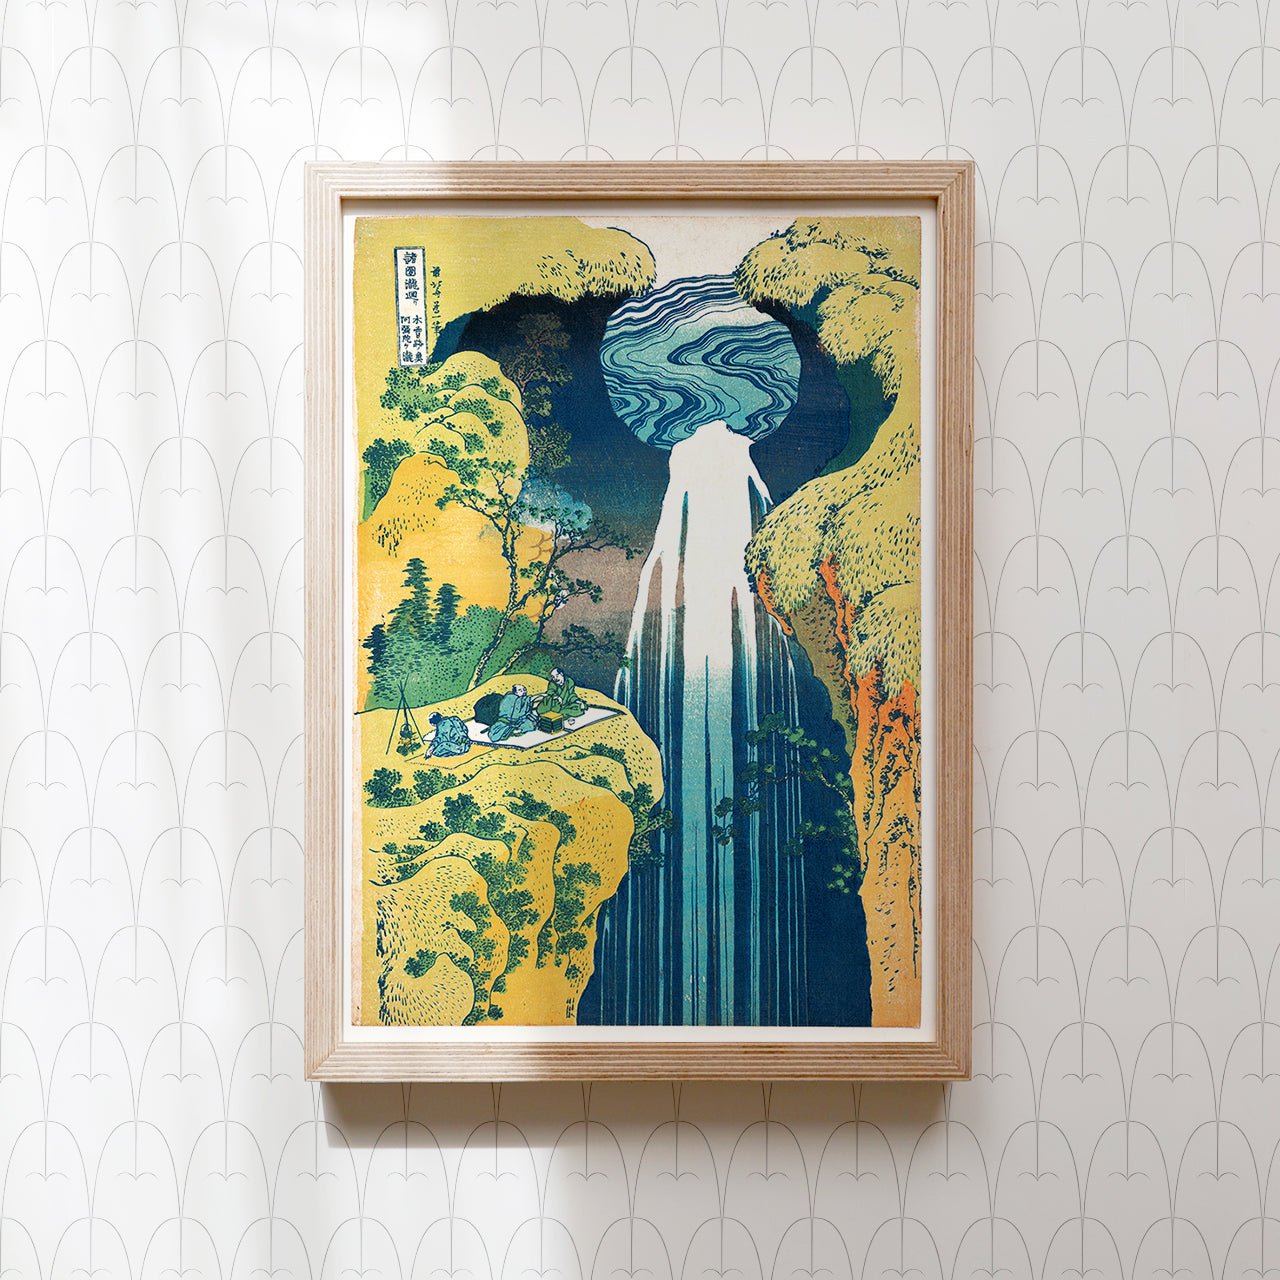 The Amida Falls in the Far Reaches of the Kisokaidō Road - Japonica Graphic